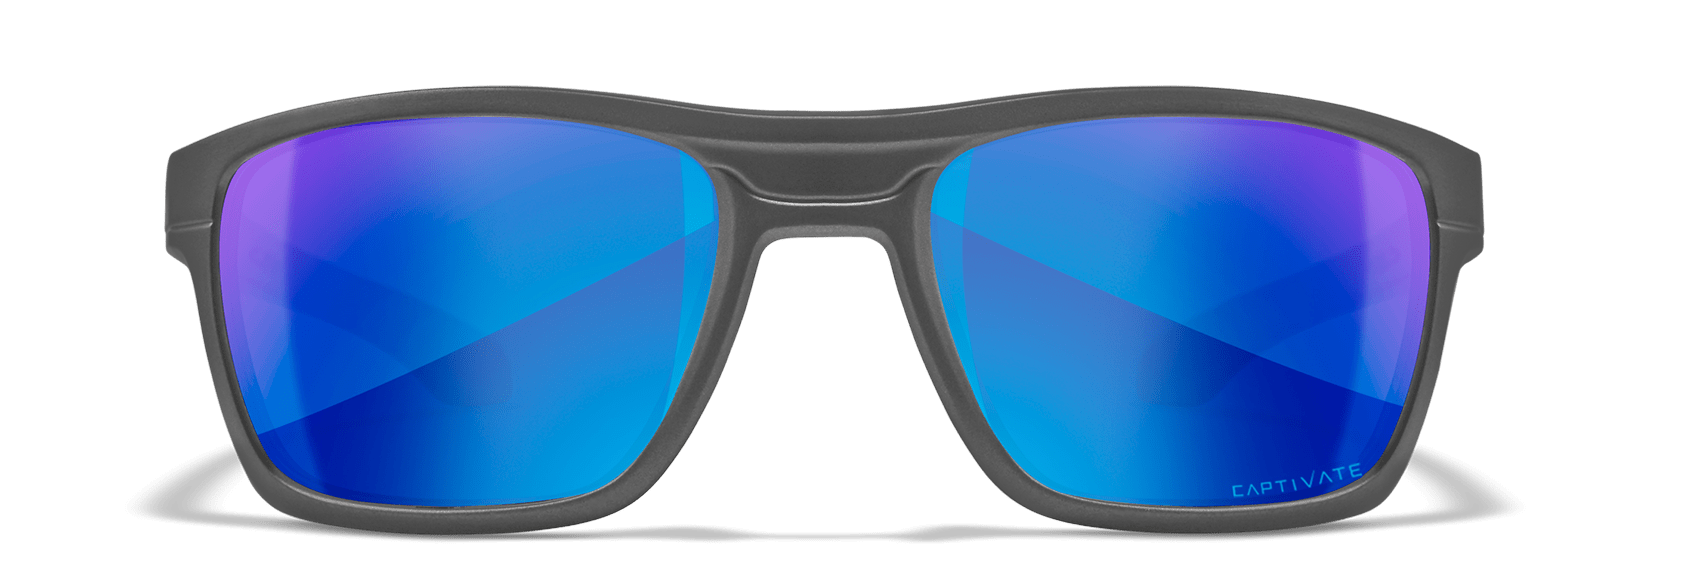 Wiley X Kingpin Sunglasses with Matte Graphite Frame and Polarized Blue Mirror Lens Front Lenses